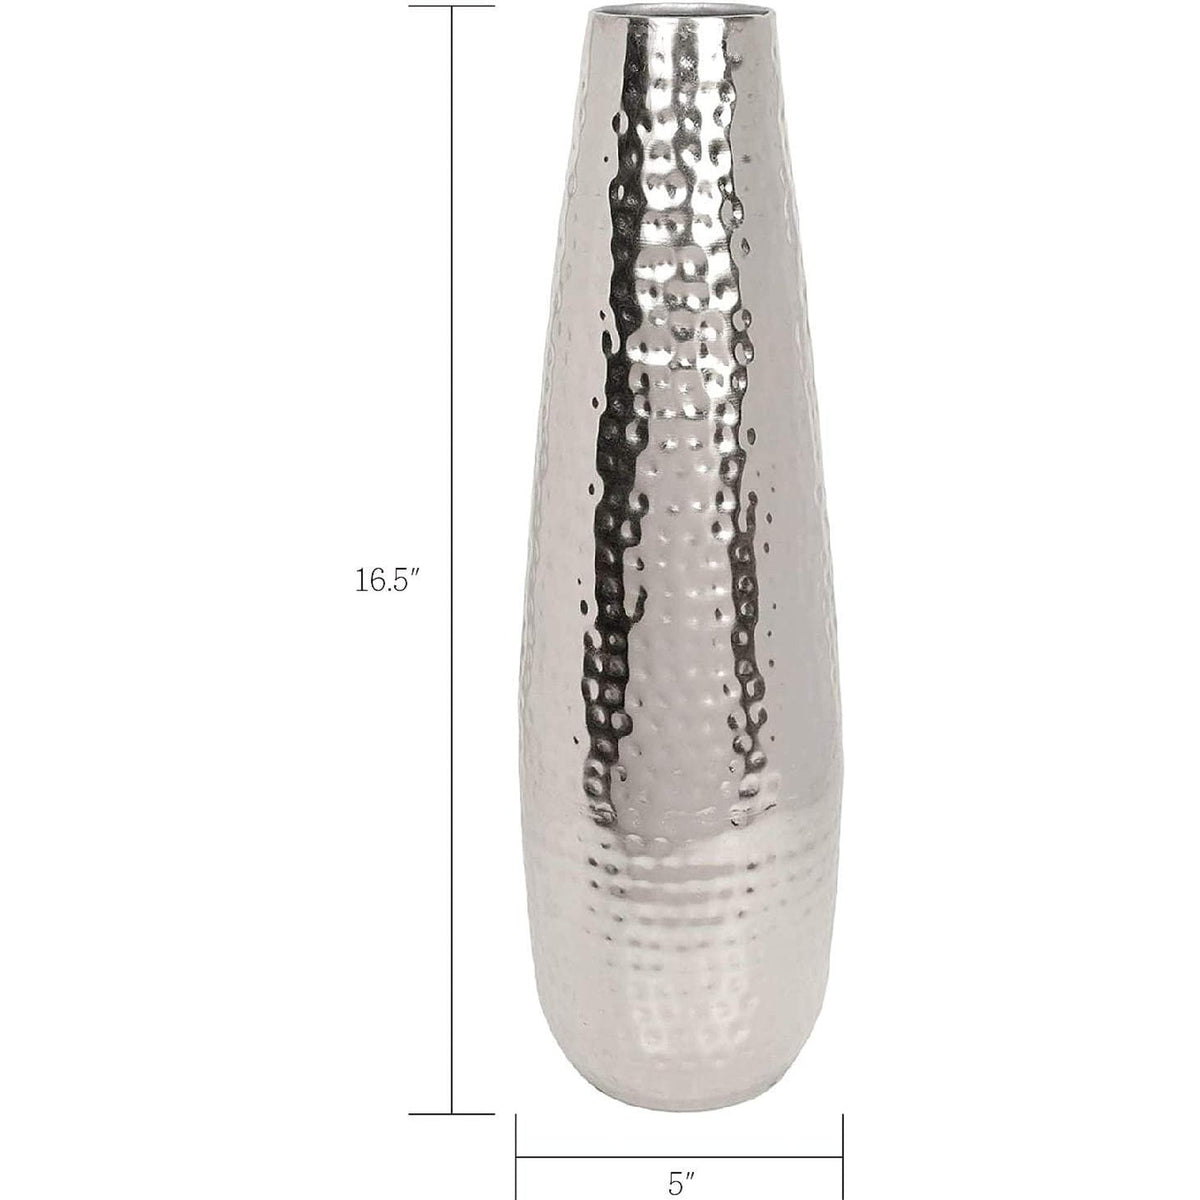 HOSLEY® Metal Teardrop Hammered Vase,  Silver Finish, 16.5 Inches High